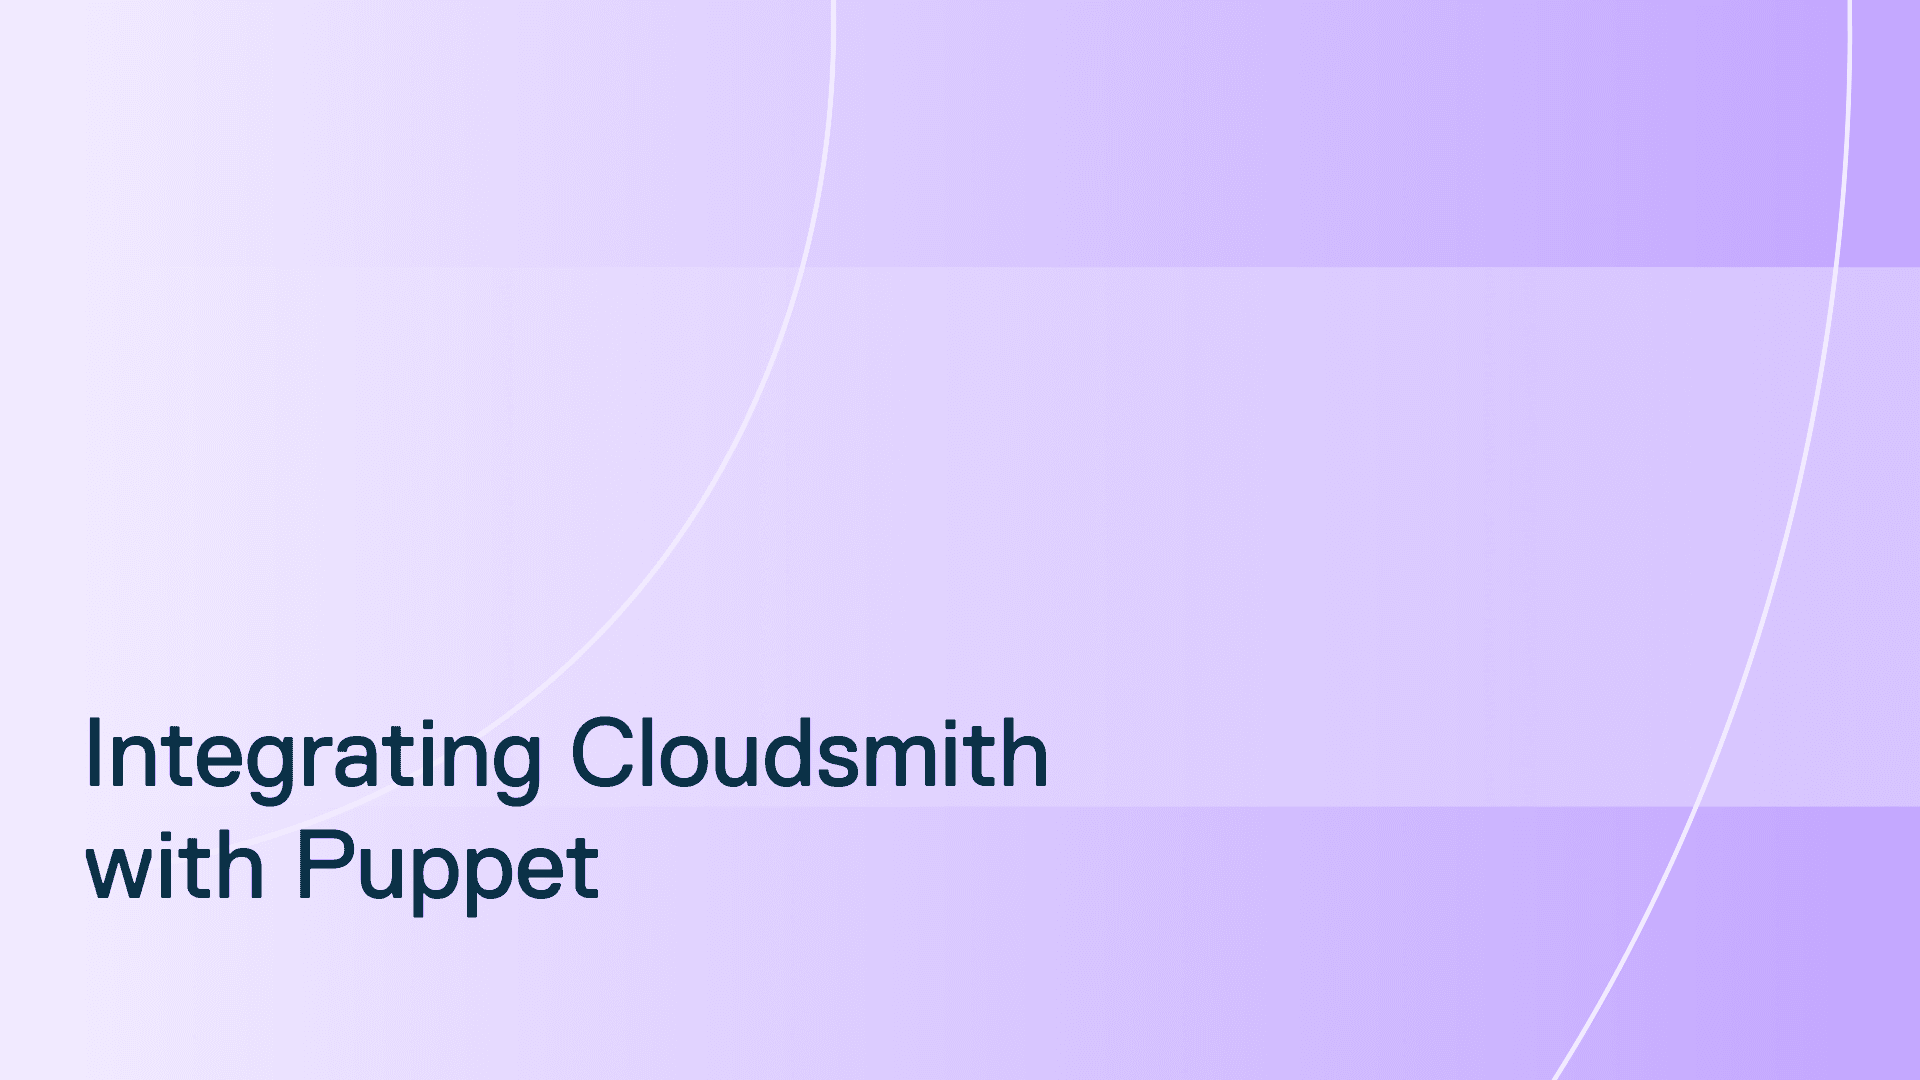 Using Puppet to Deploy package to Cloudsmith